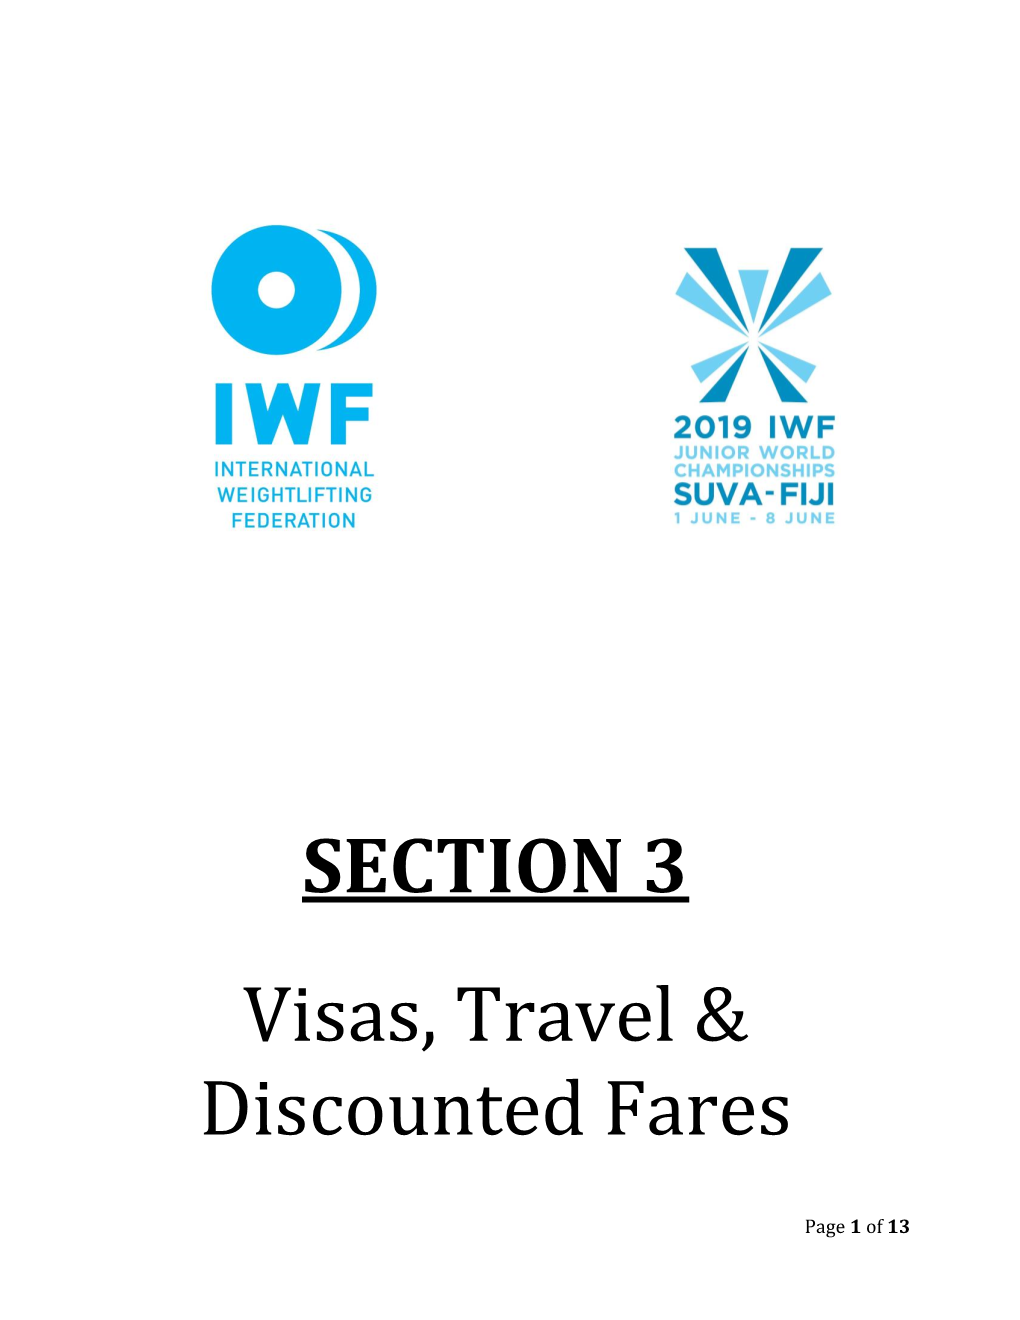 SECTION 3 Visas, Travel & Discounted Fares